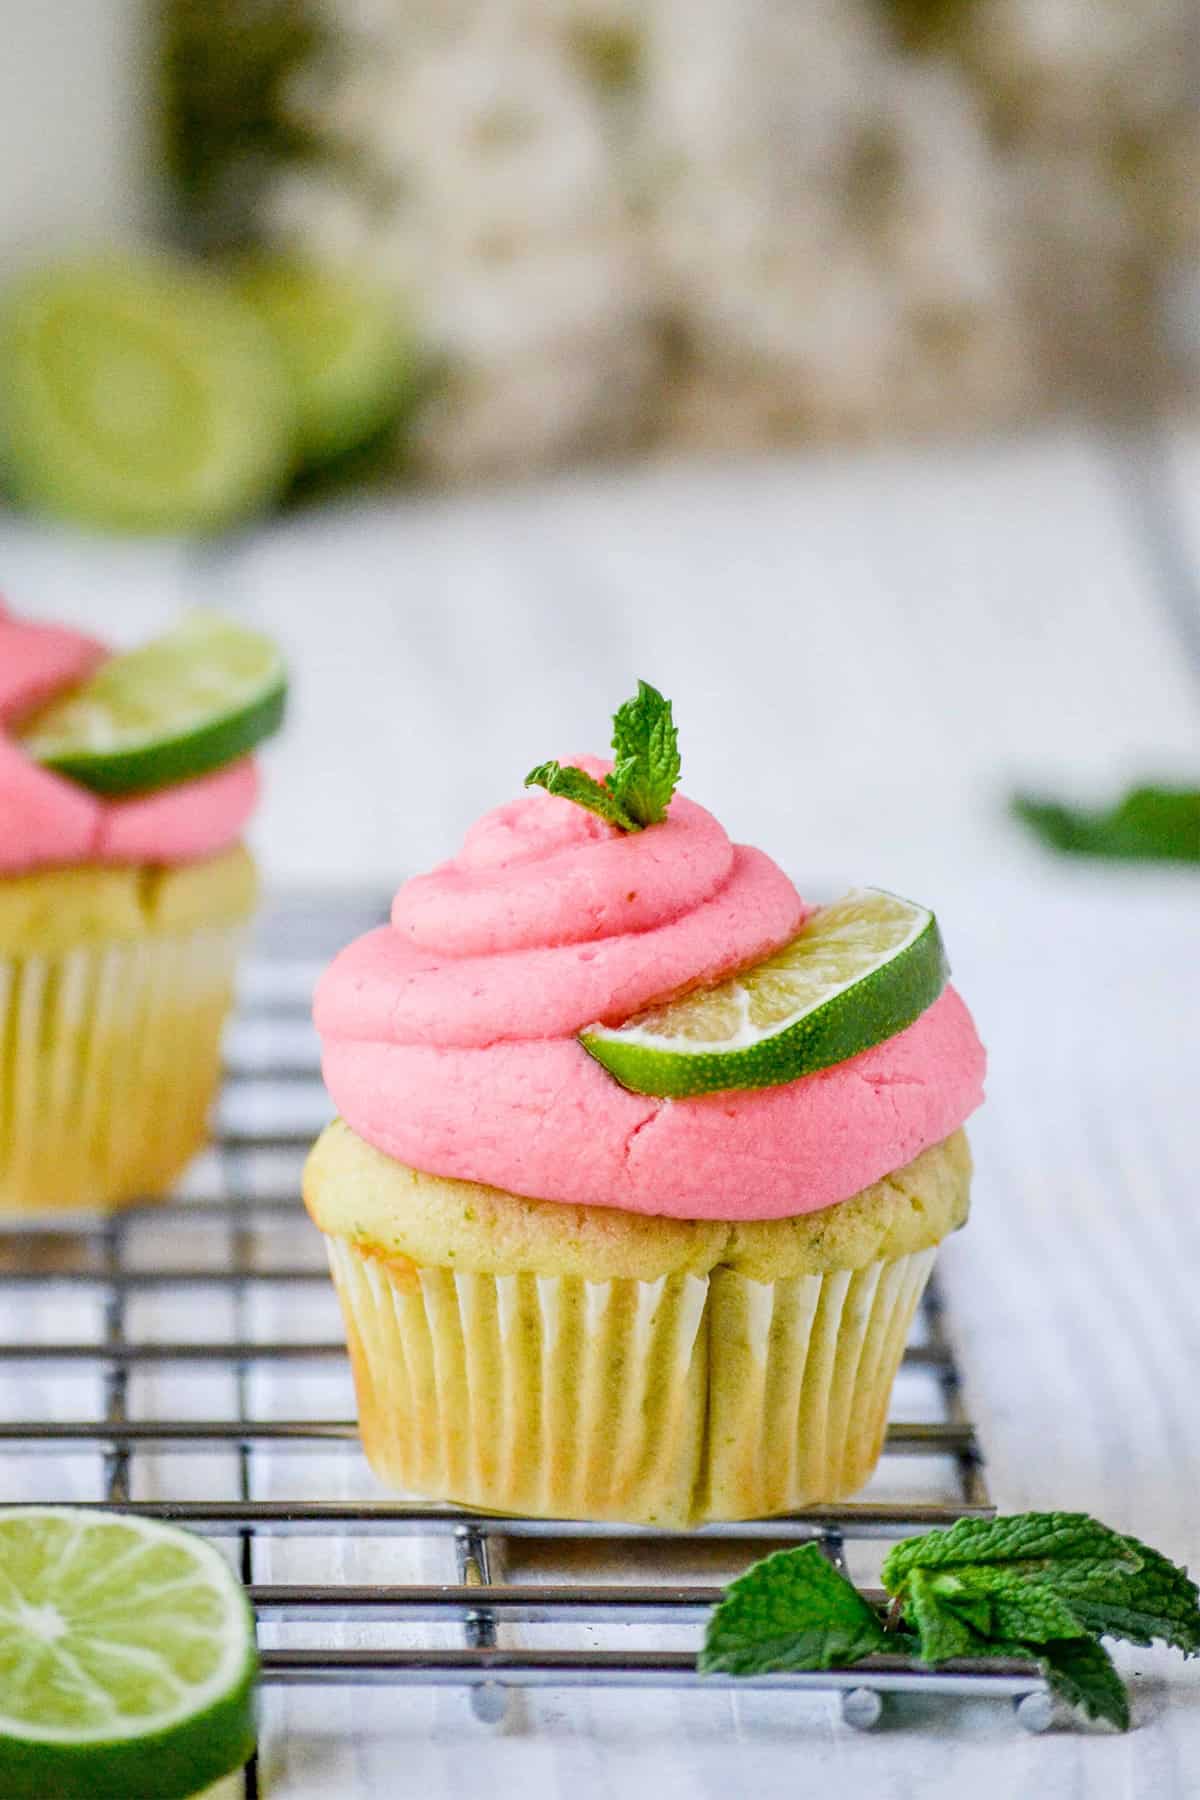 Summer Berry Mojito cupcake make a unique cupcake flavor idea with raspberry puree frosting and mint leaf and lime slice garnish.